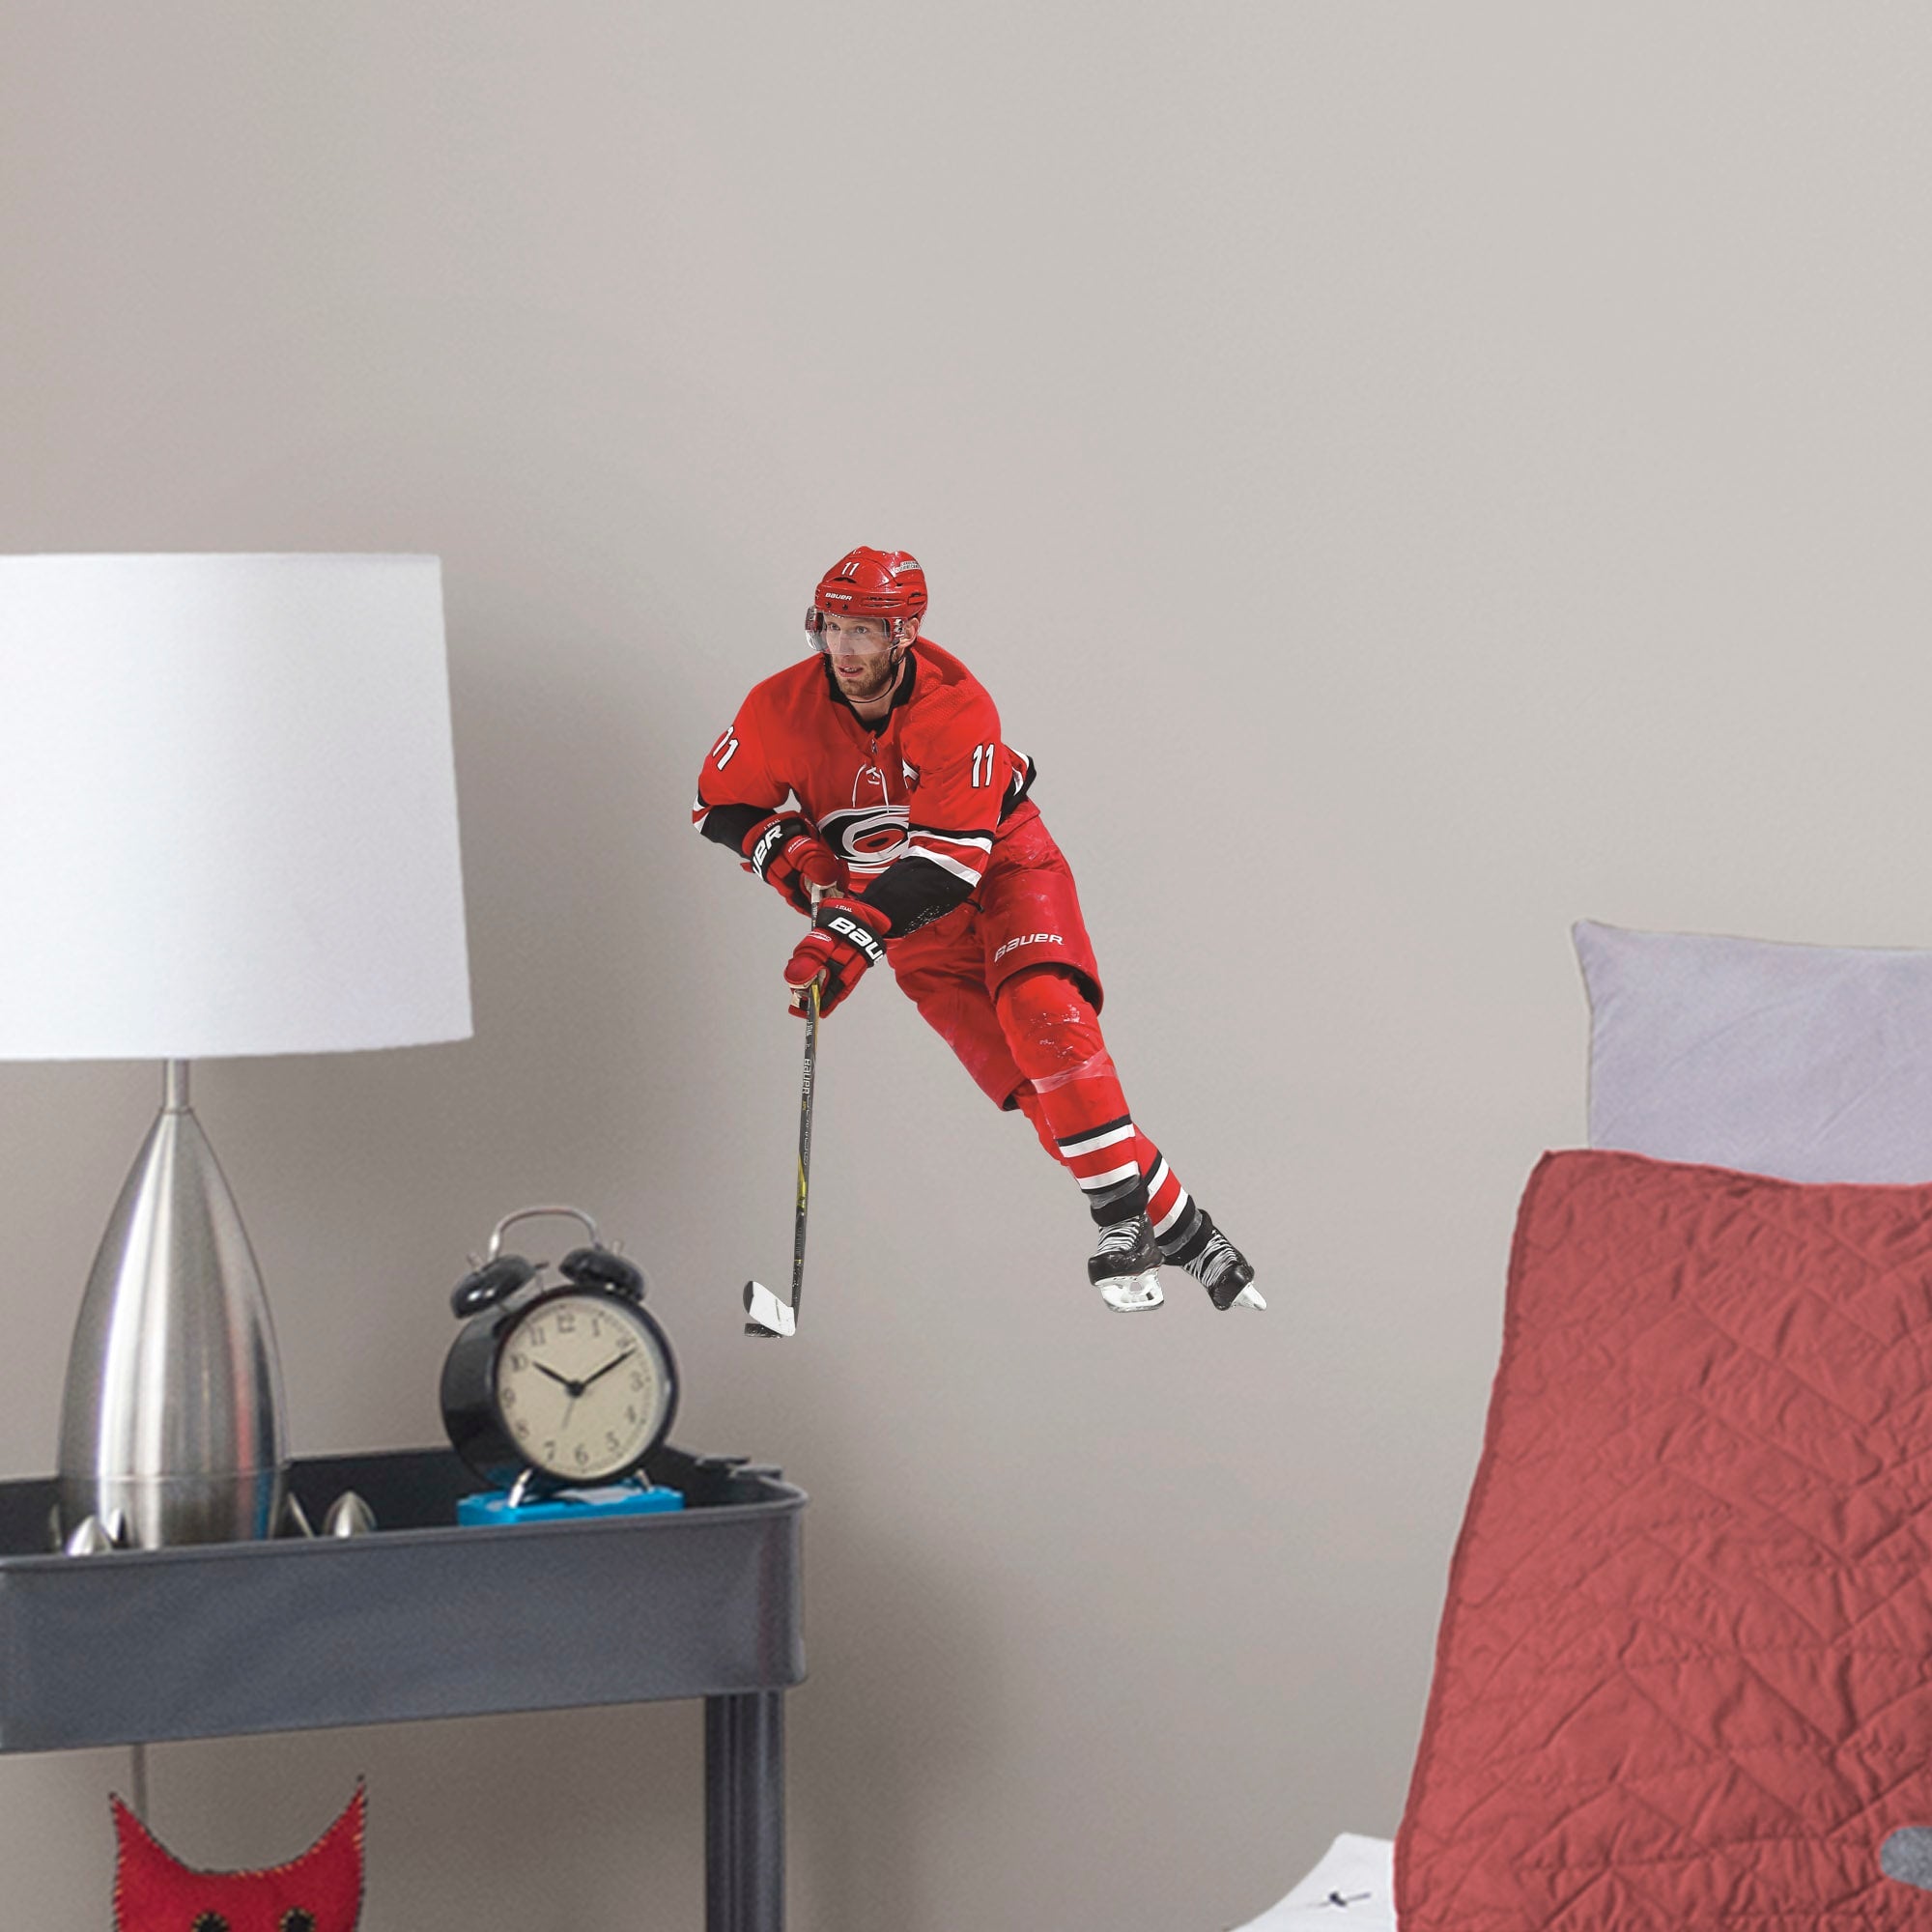 Jordan Staal for Carolina Hurricanes - Officially Licensed NHL Removable Wall Decal Large by Fathead | Vinyl